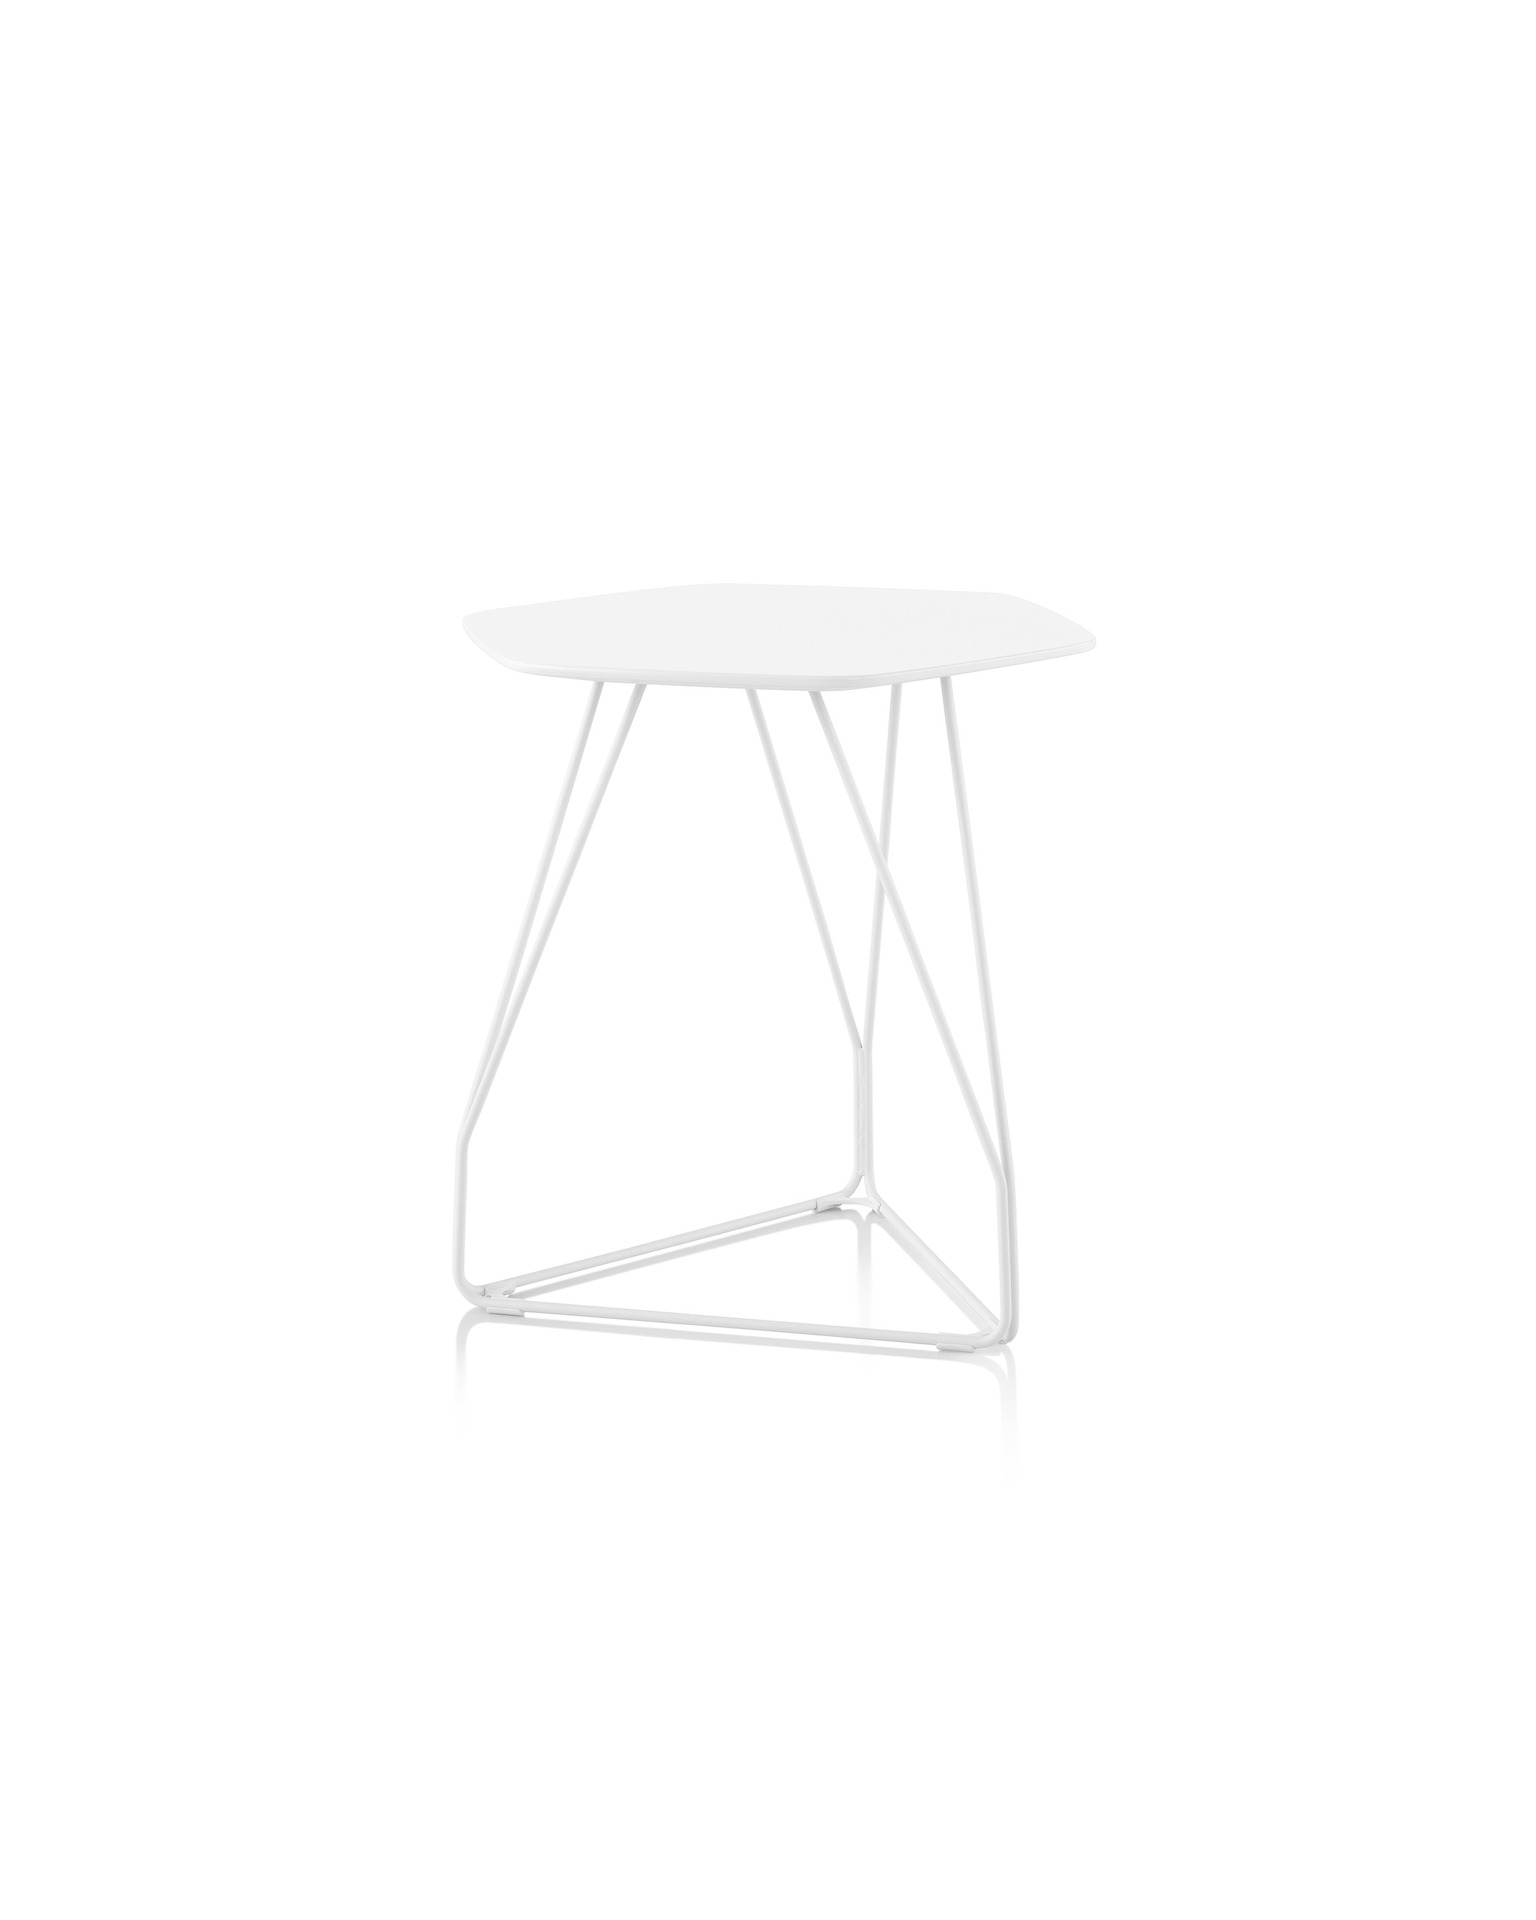 Polygon Wire Table in white with a hexagon-shaped table top.